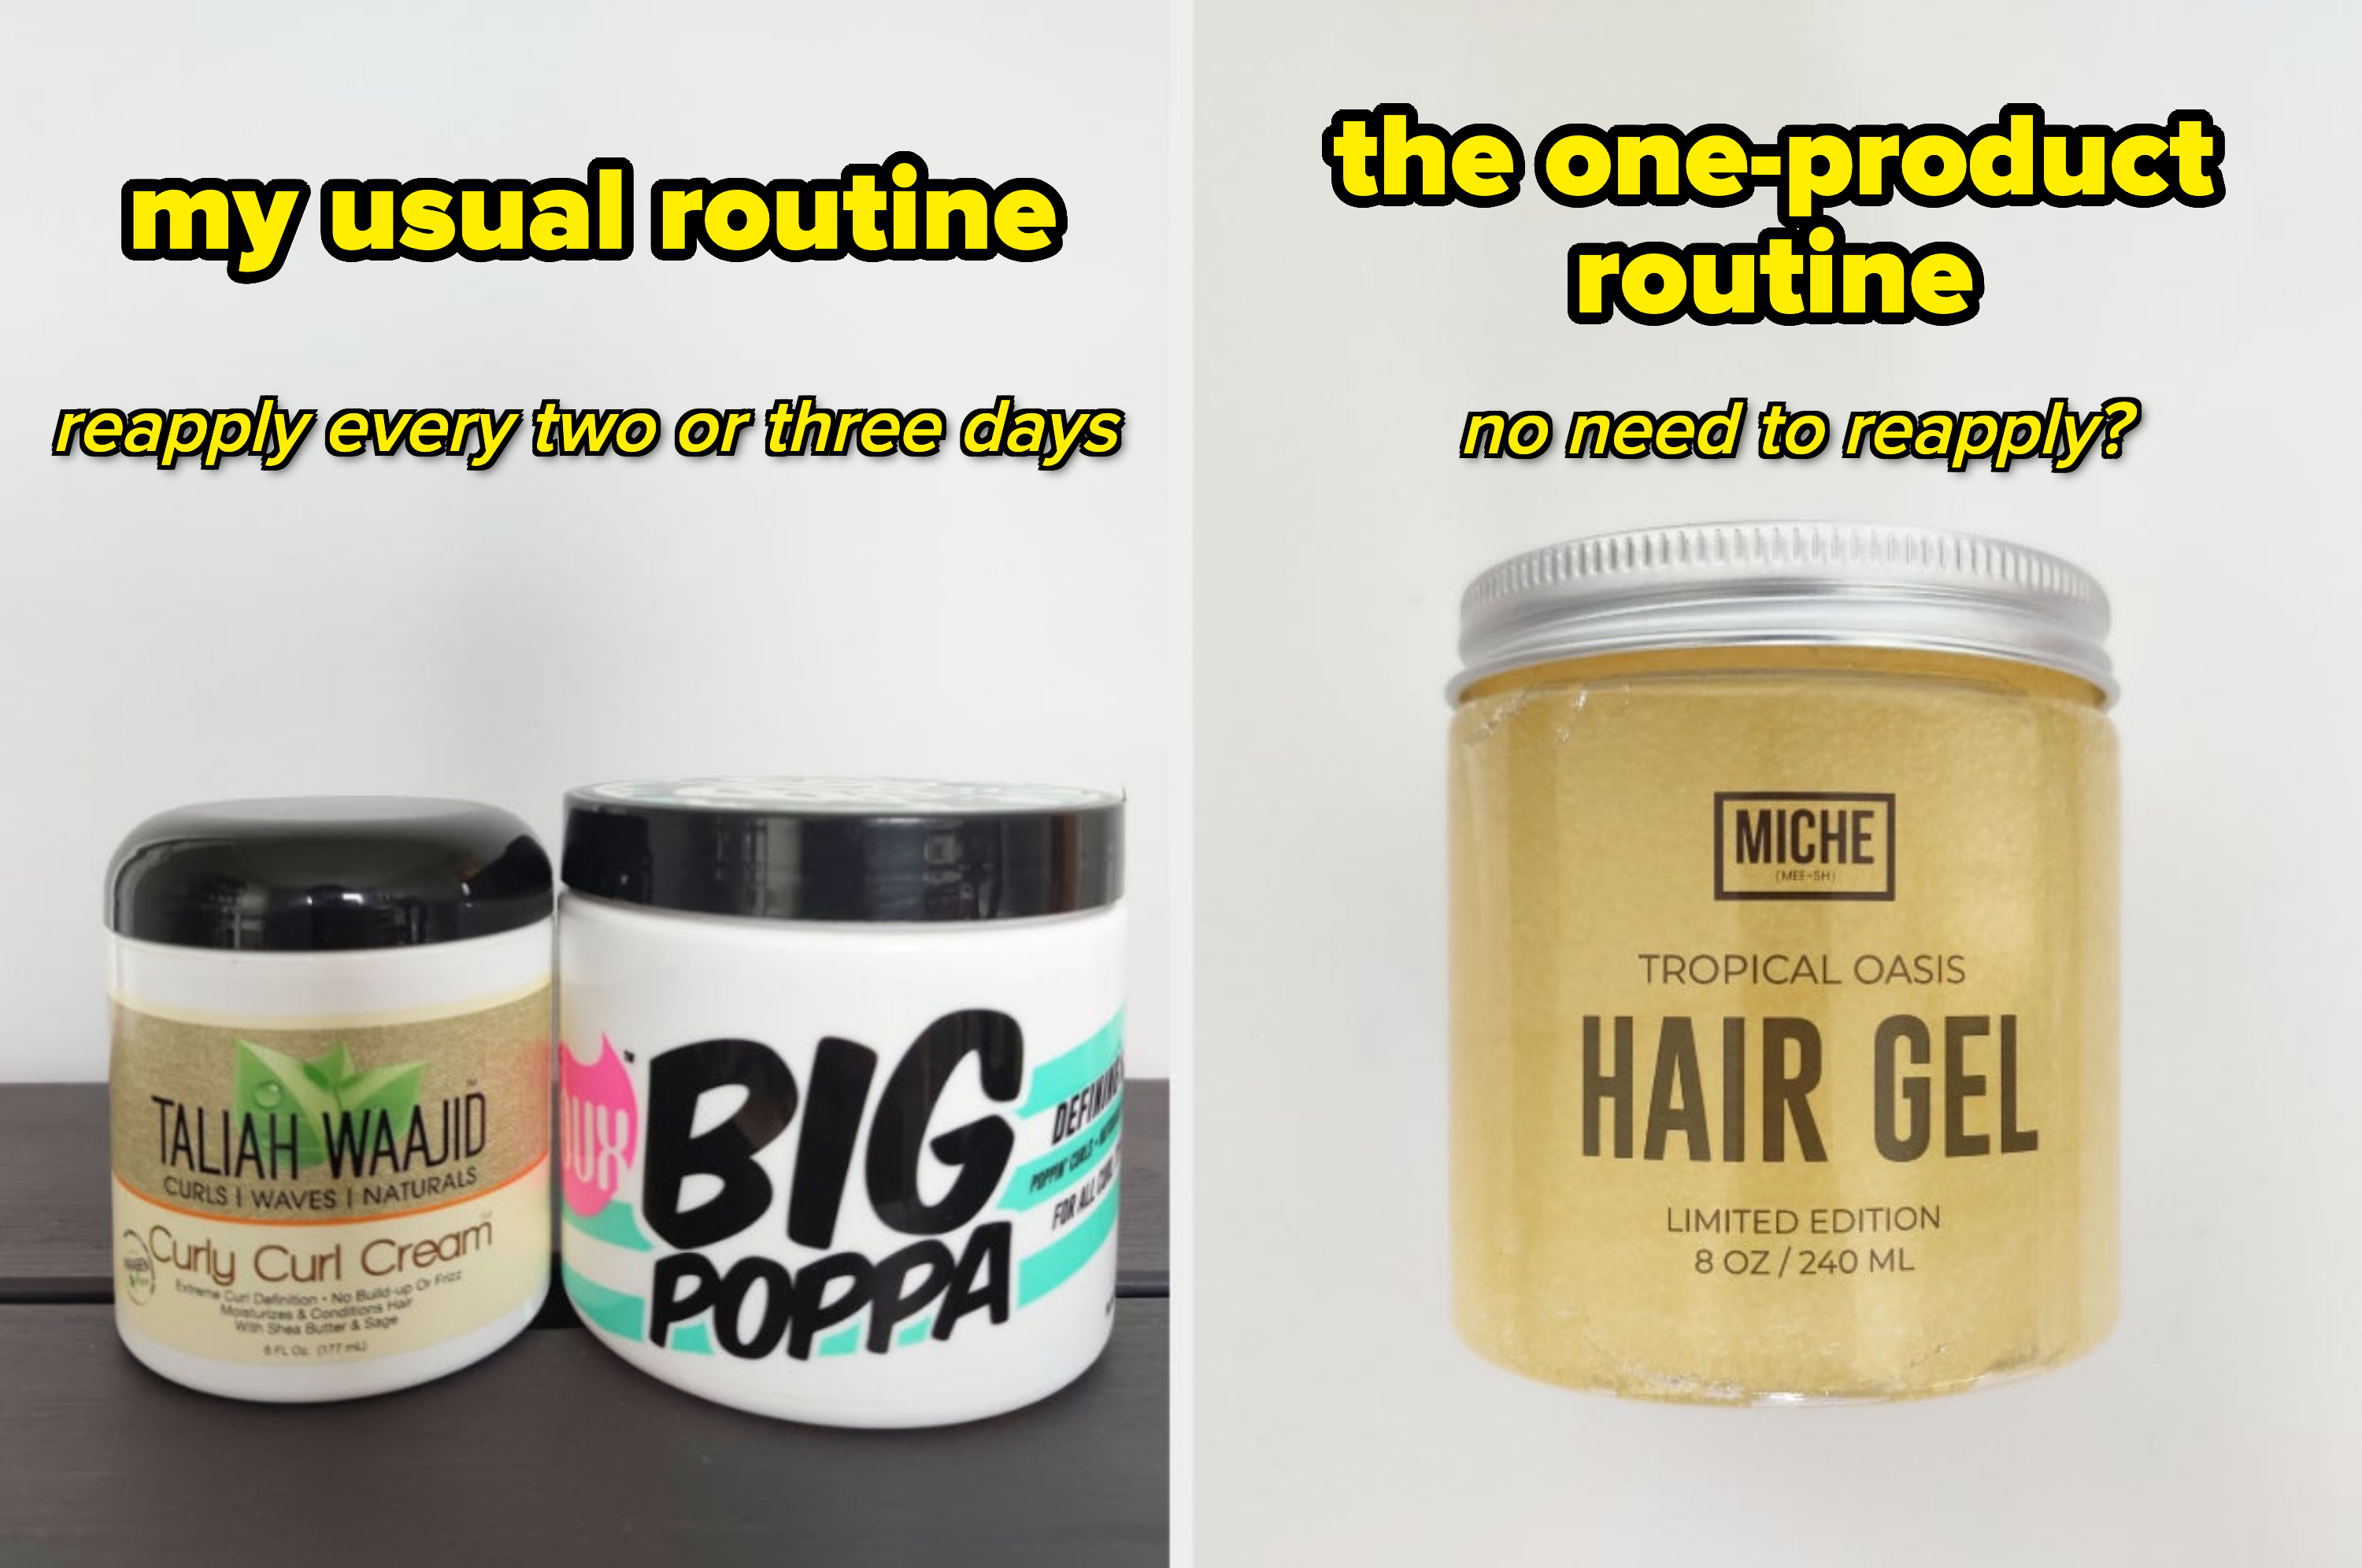 Two hair styling products, one labeled for defining curls and the other as a hair gel